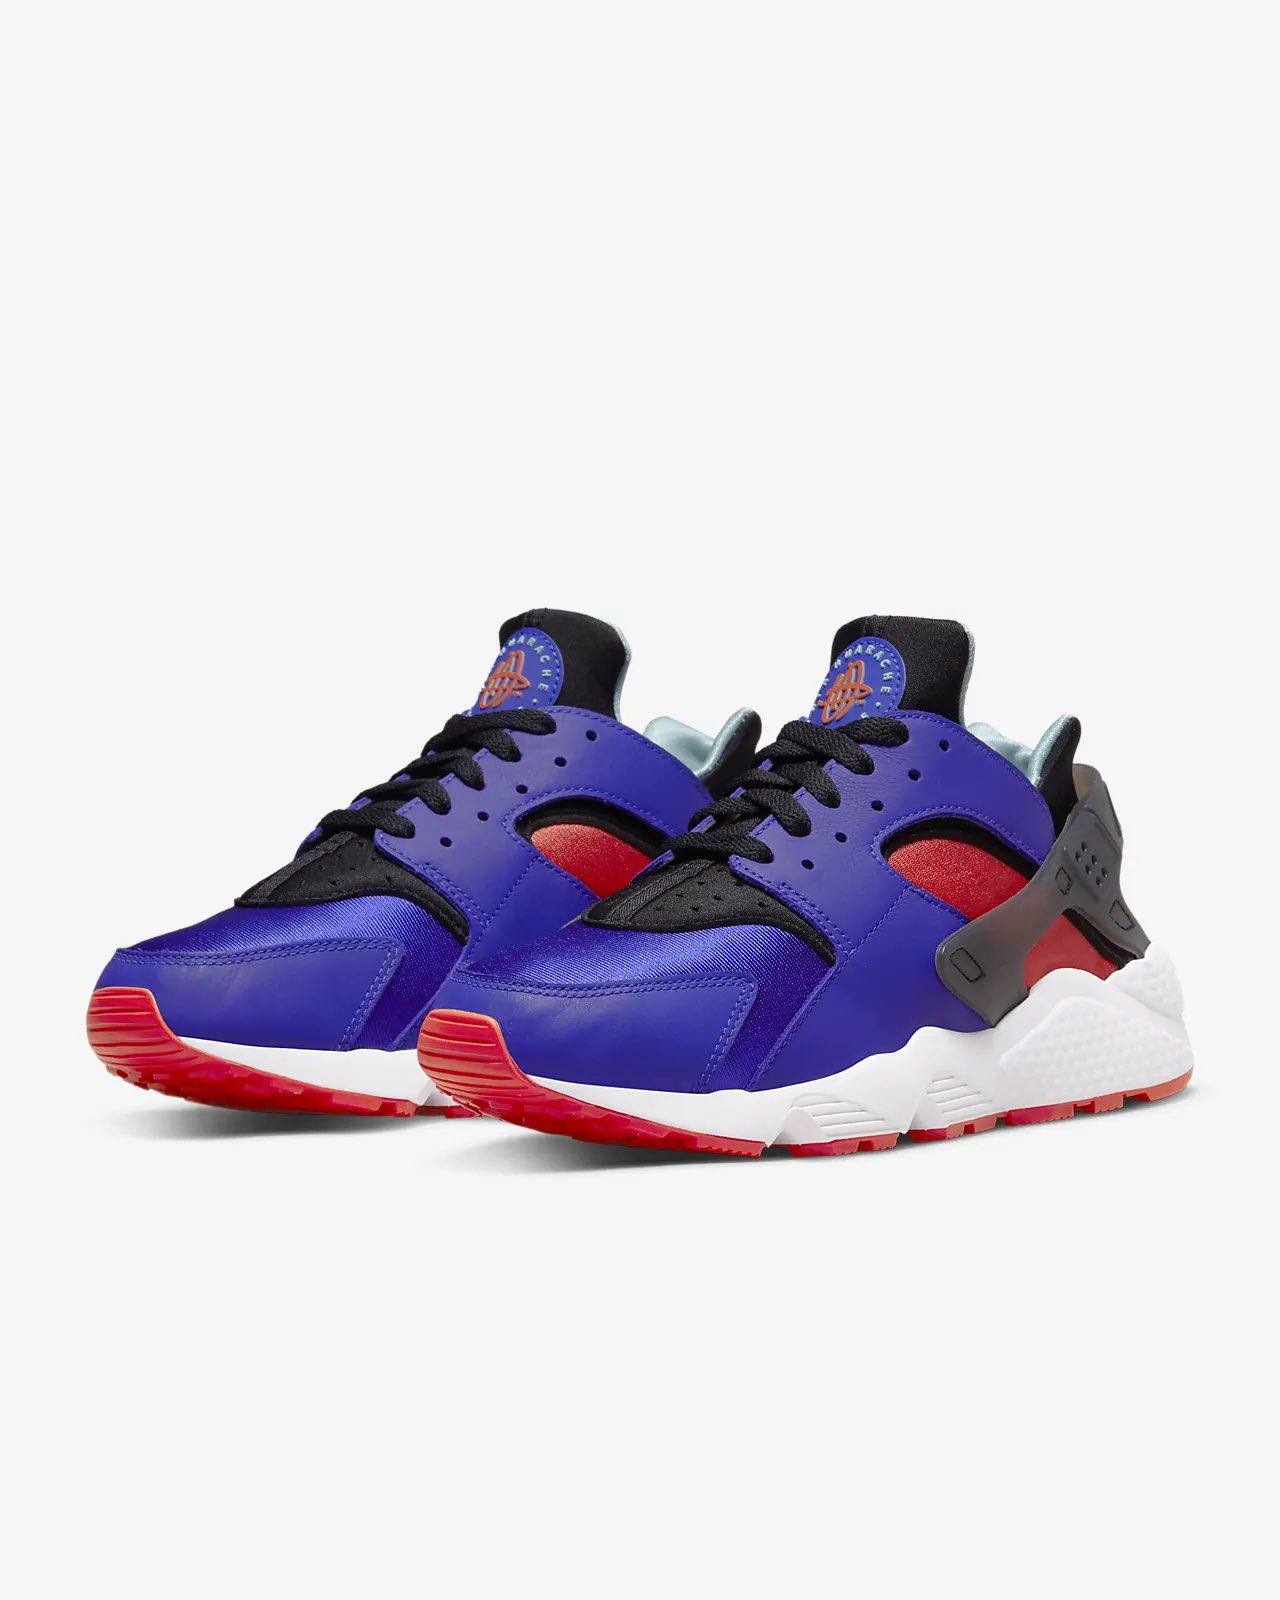 SNKR_TWITR on Twitter: "Dropped Nike US: Air Huarache 'Concord/Team Orange' Shop https://t.co/fO7hm5VnXf #AD https://t.co/8DQIsObZs3" / Twitter